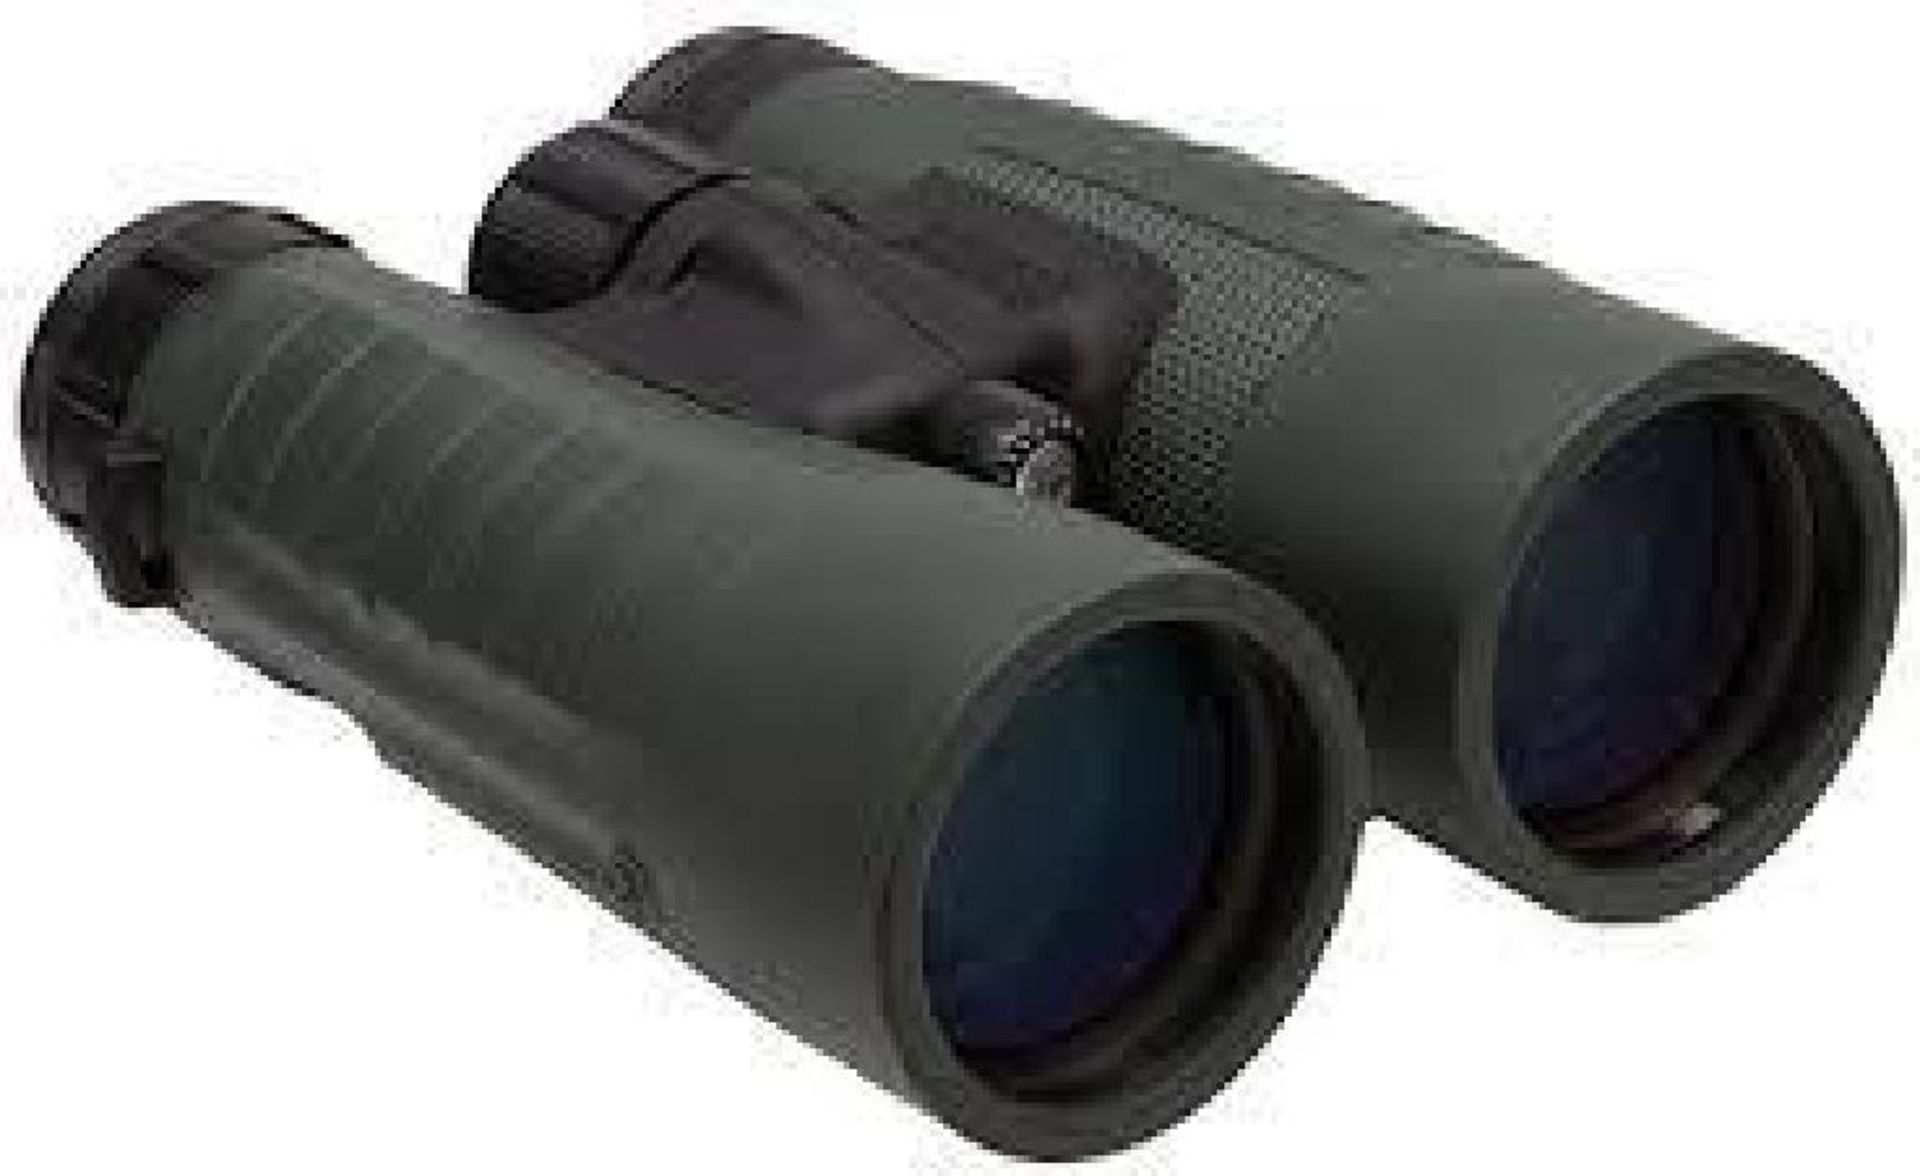 !NEW! Specs Adj Size:.50 MOA @ 100 yds/Magnification 2-6x Objective:32mm Field of View 029757234216